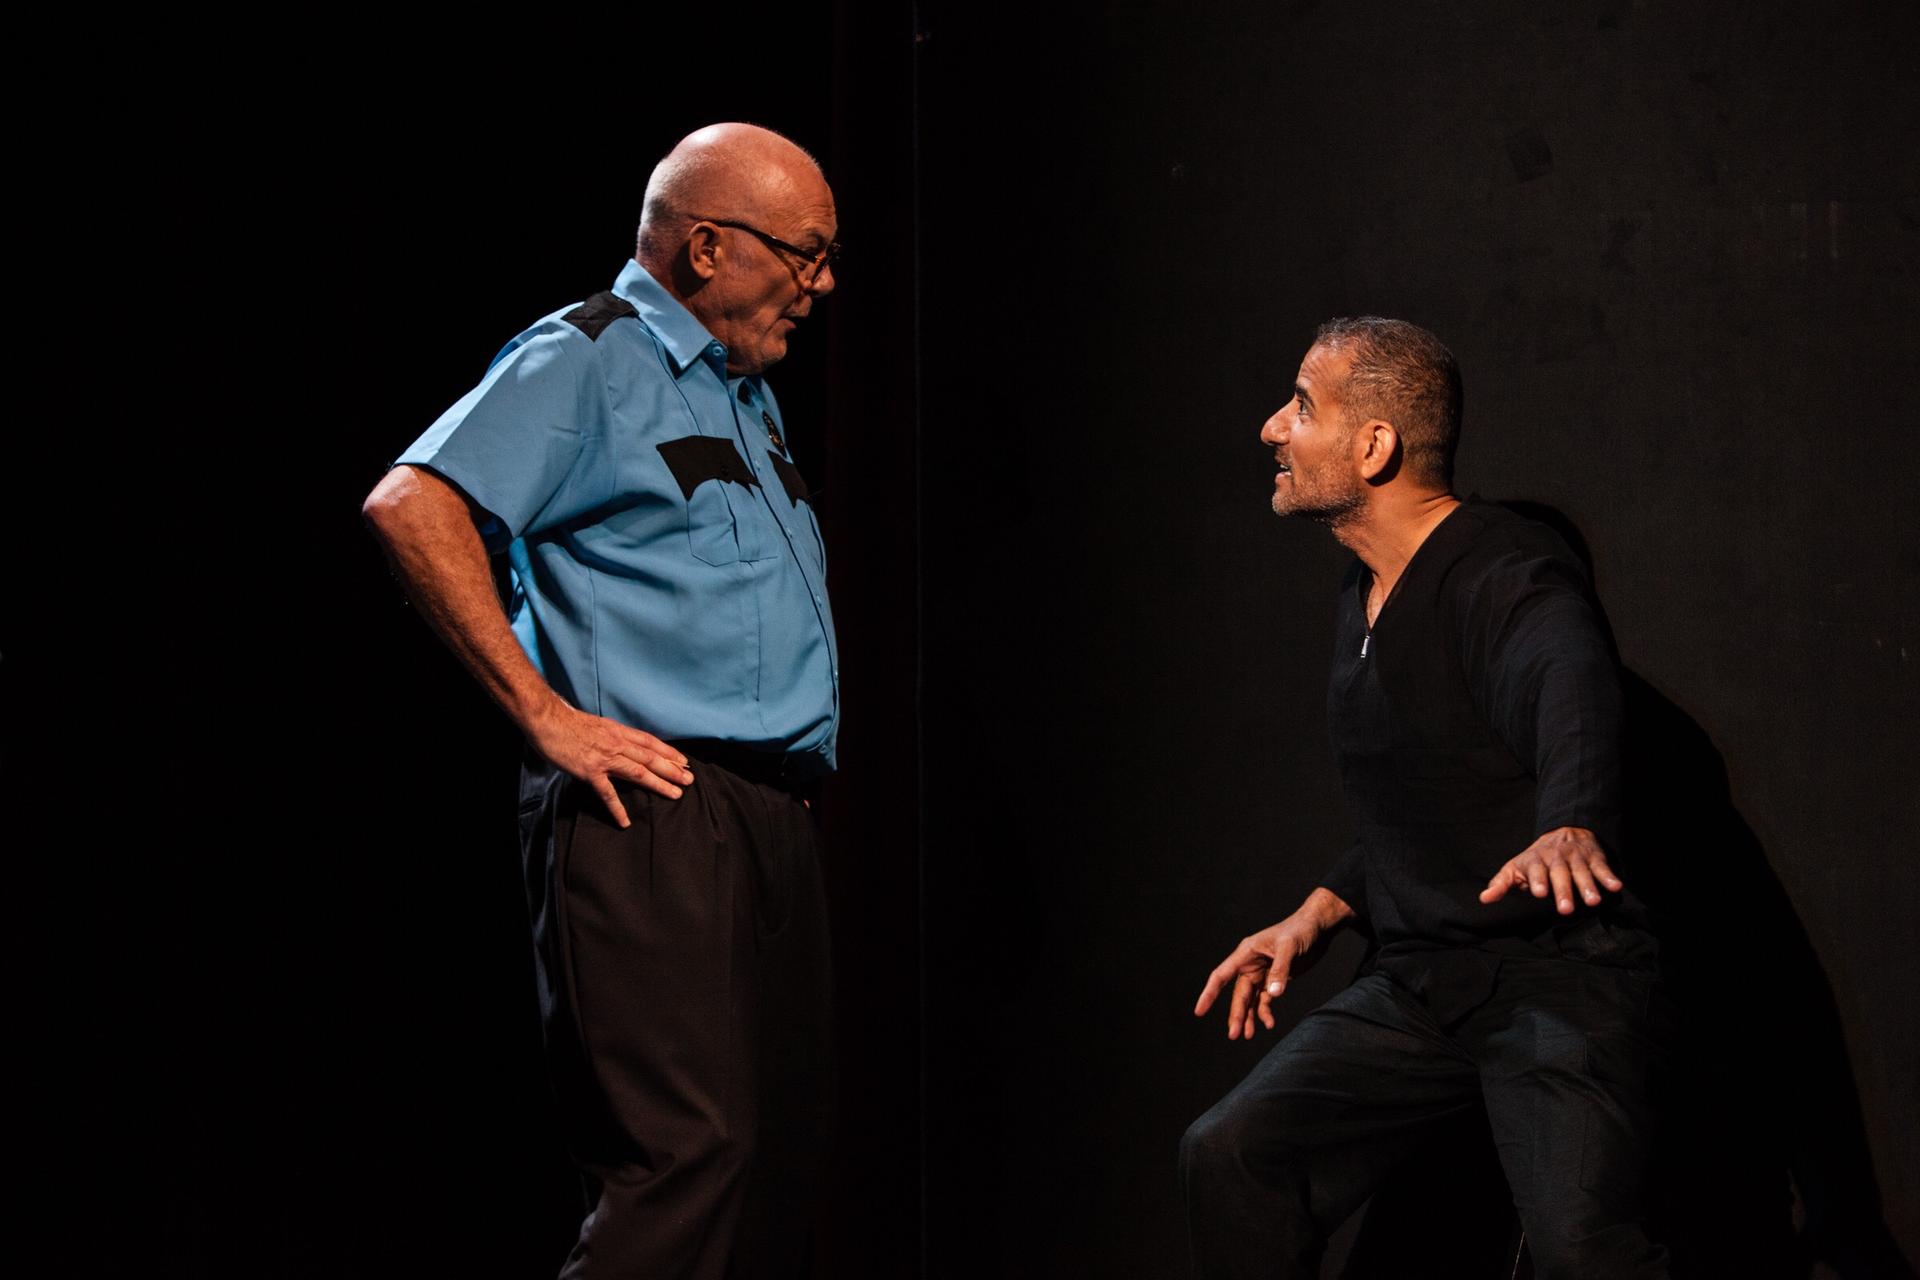 Actors Paul Costello, left, and Nabil Awad perform in a play 